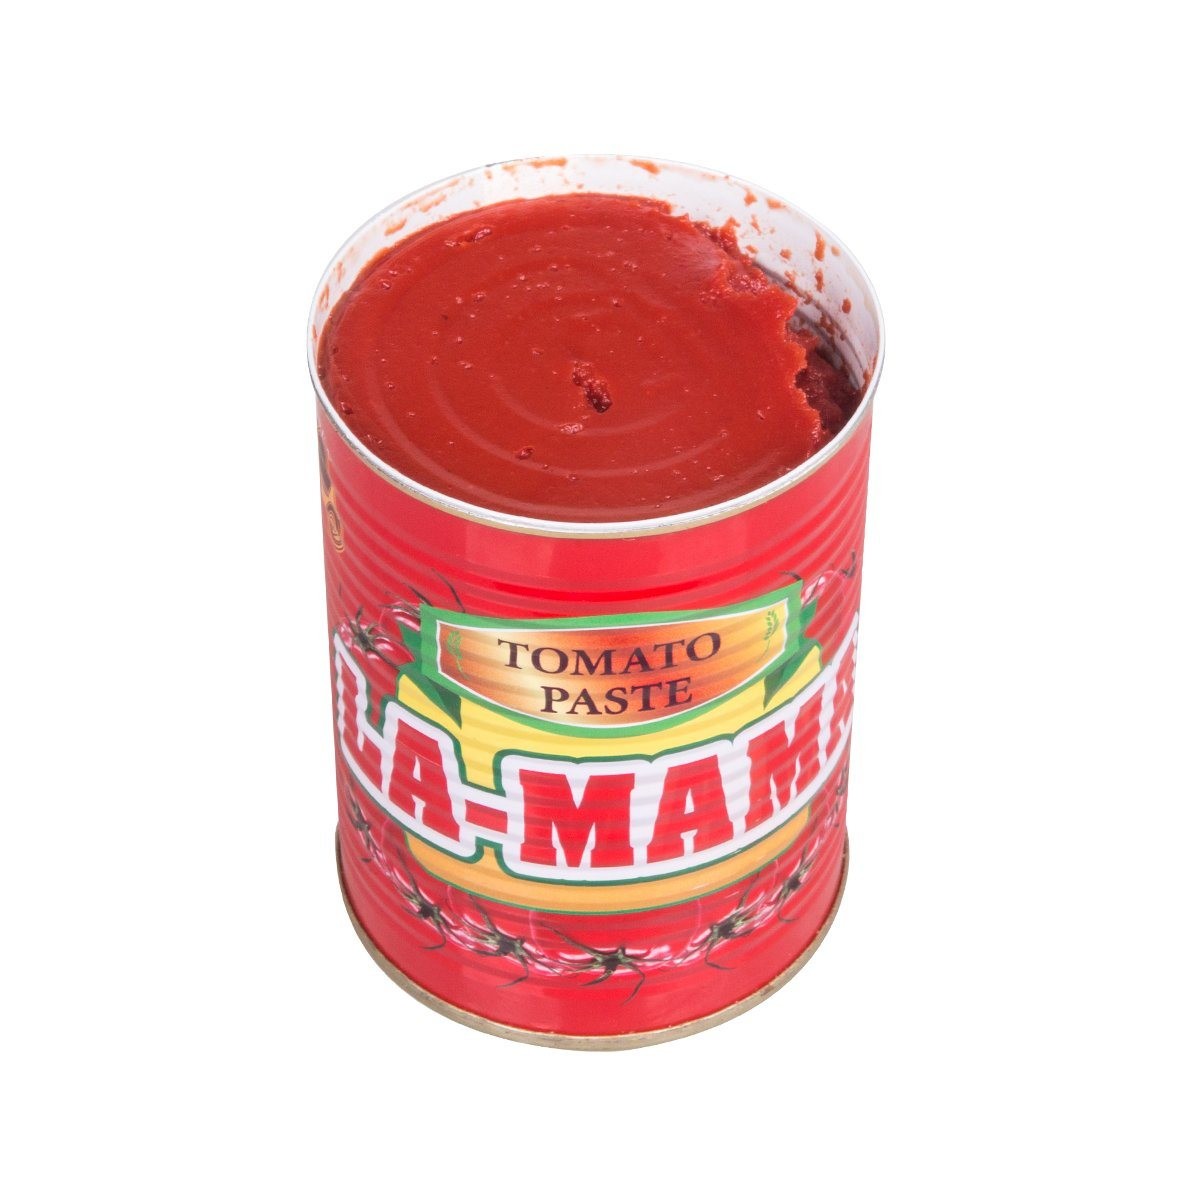 Delicious and Tasty Tomato Paste Canned in Fob China